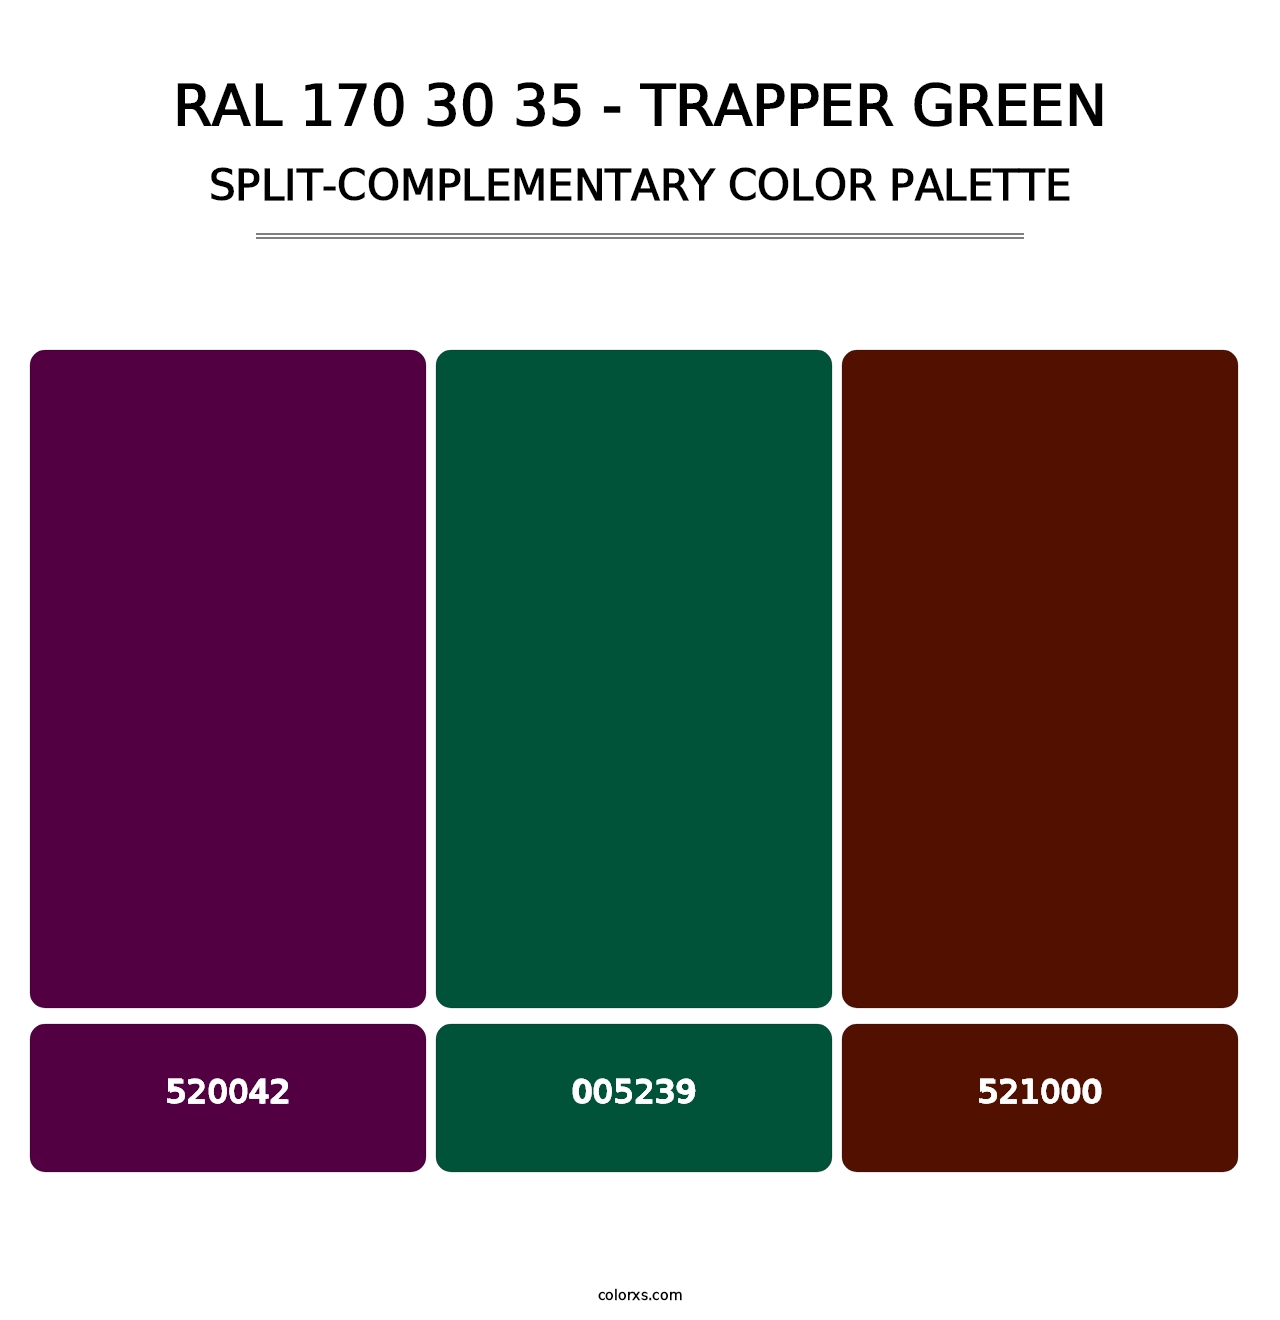 RAL 170 30 35 - Trapper Green - Split-Complementary Color Palette